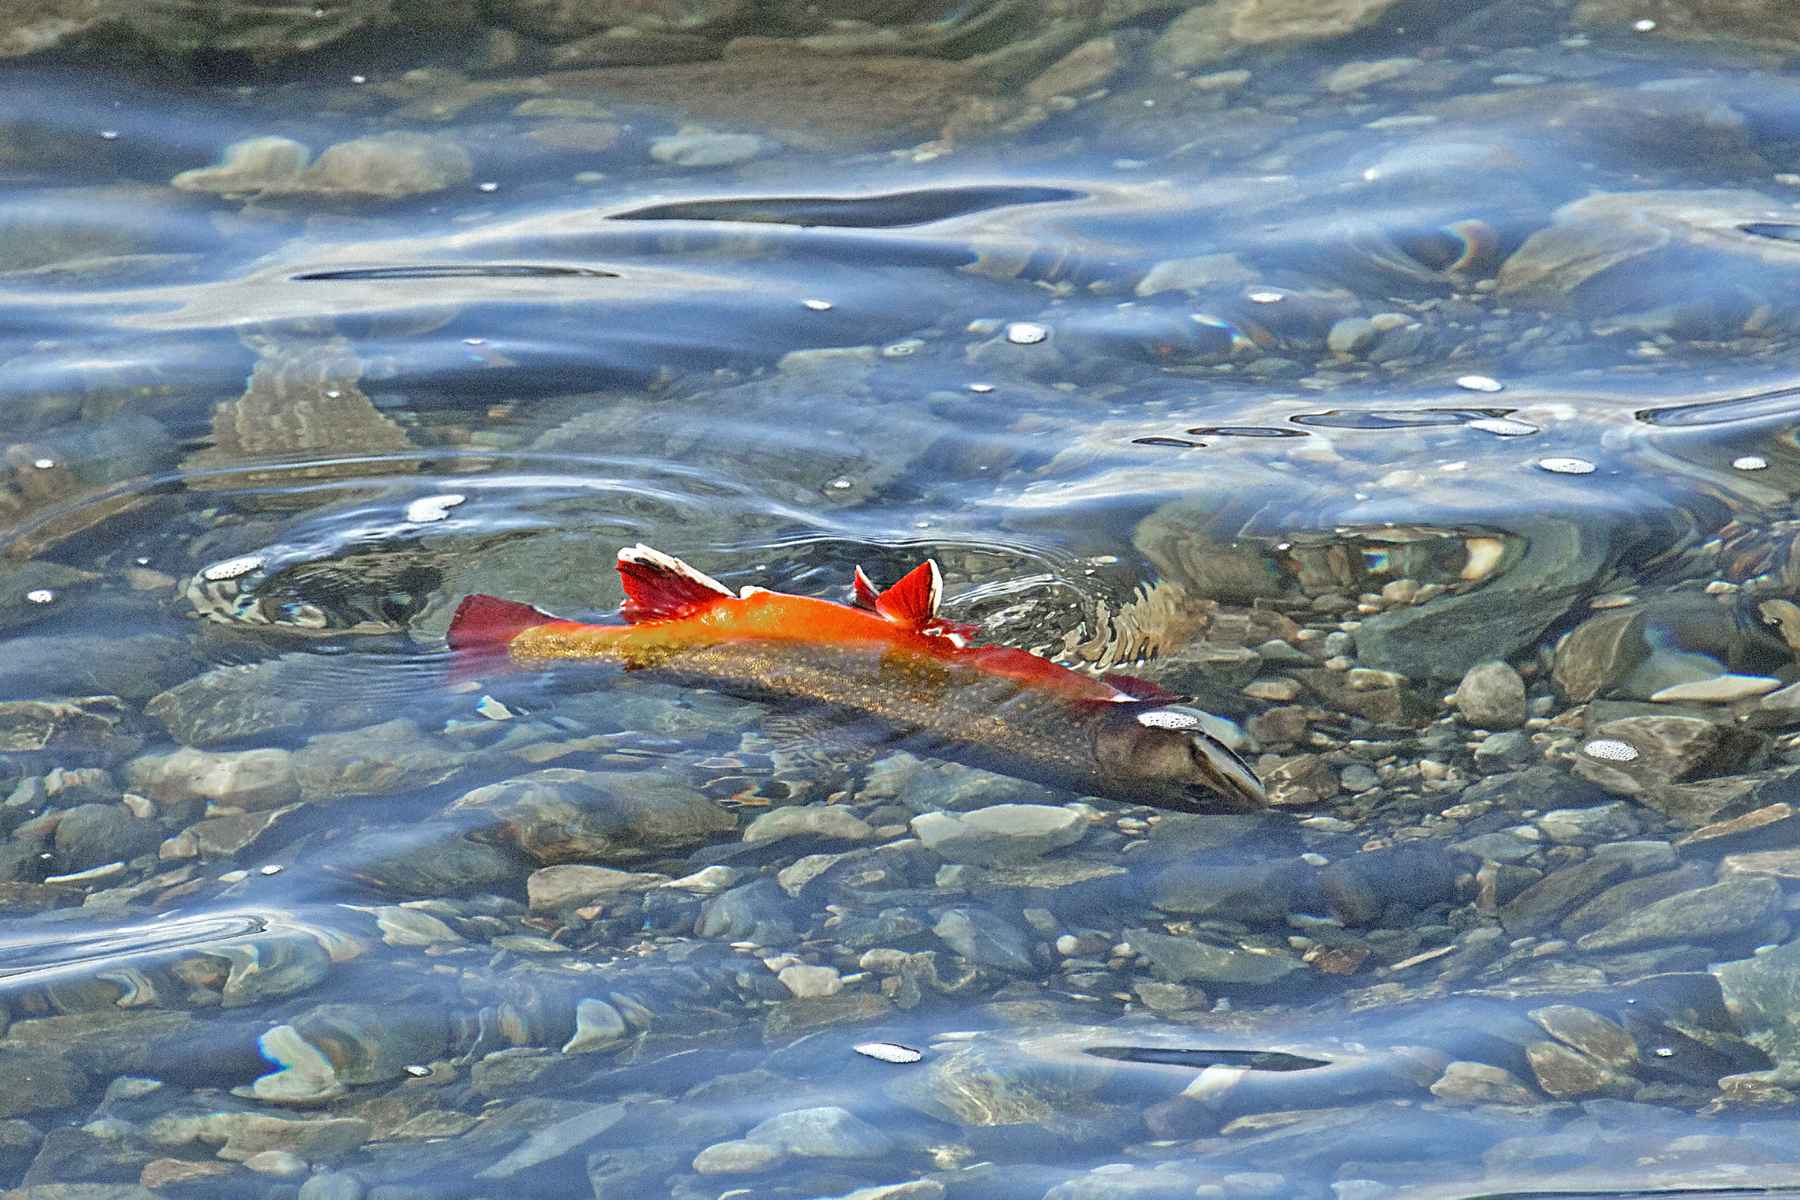 Montana enacts dramatic fishing closures due to dwindling streamflows,  excessive heat